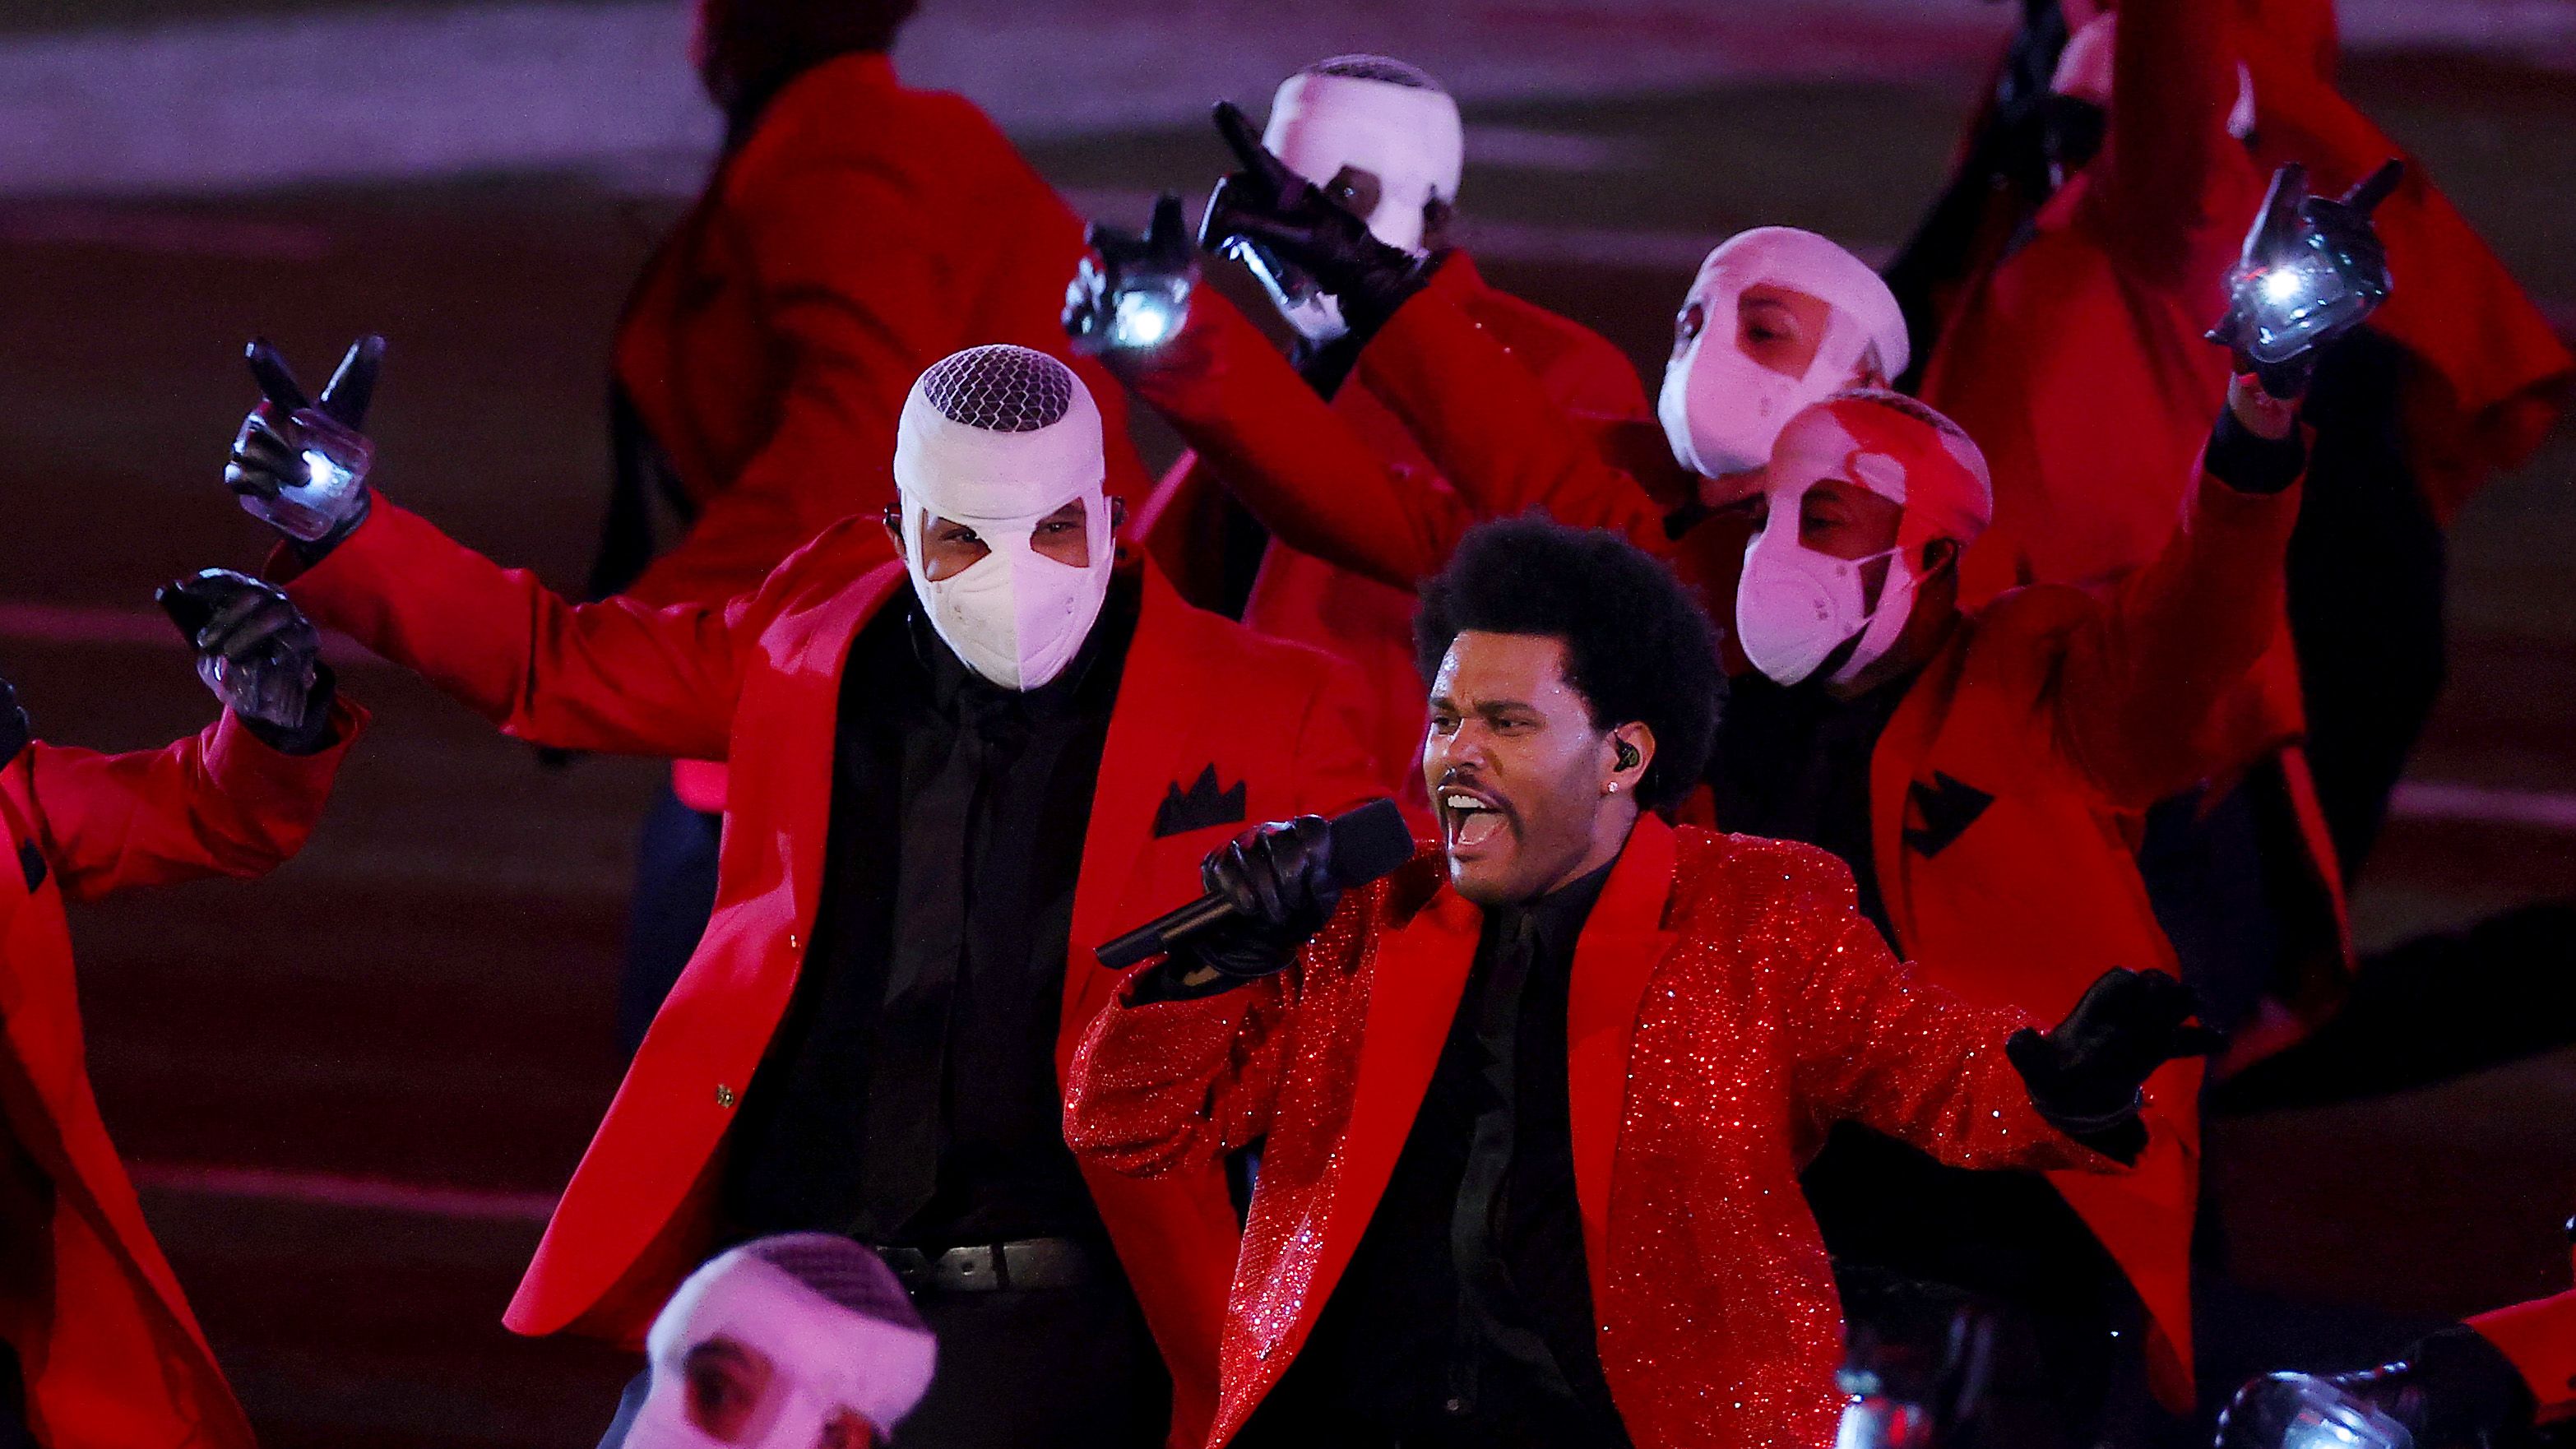 Watch The Weeknd's Super Bowl Halftime Show 2021